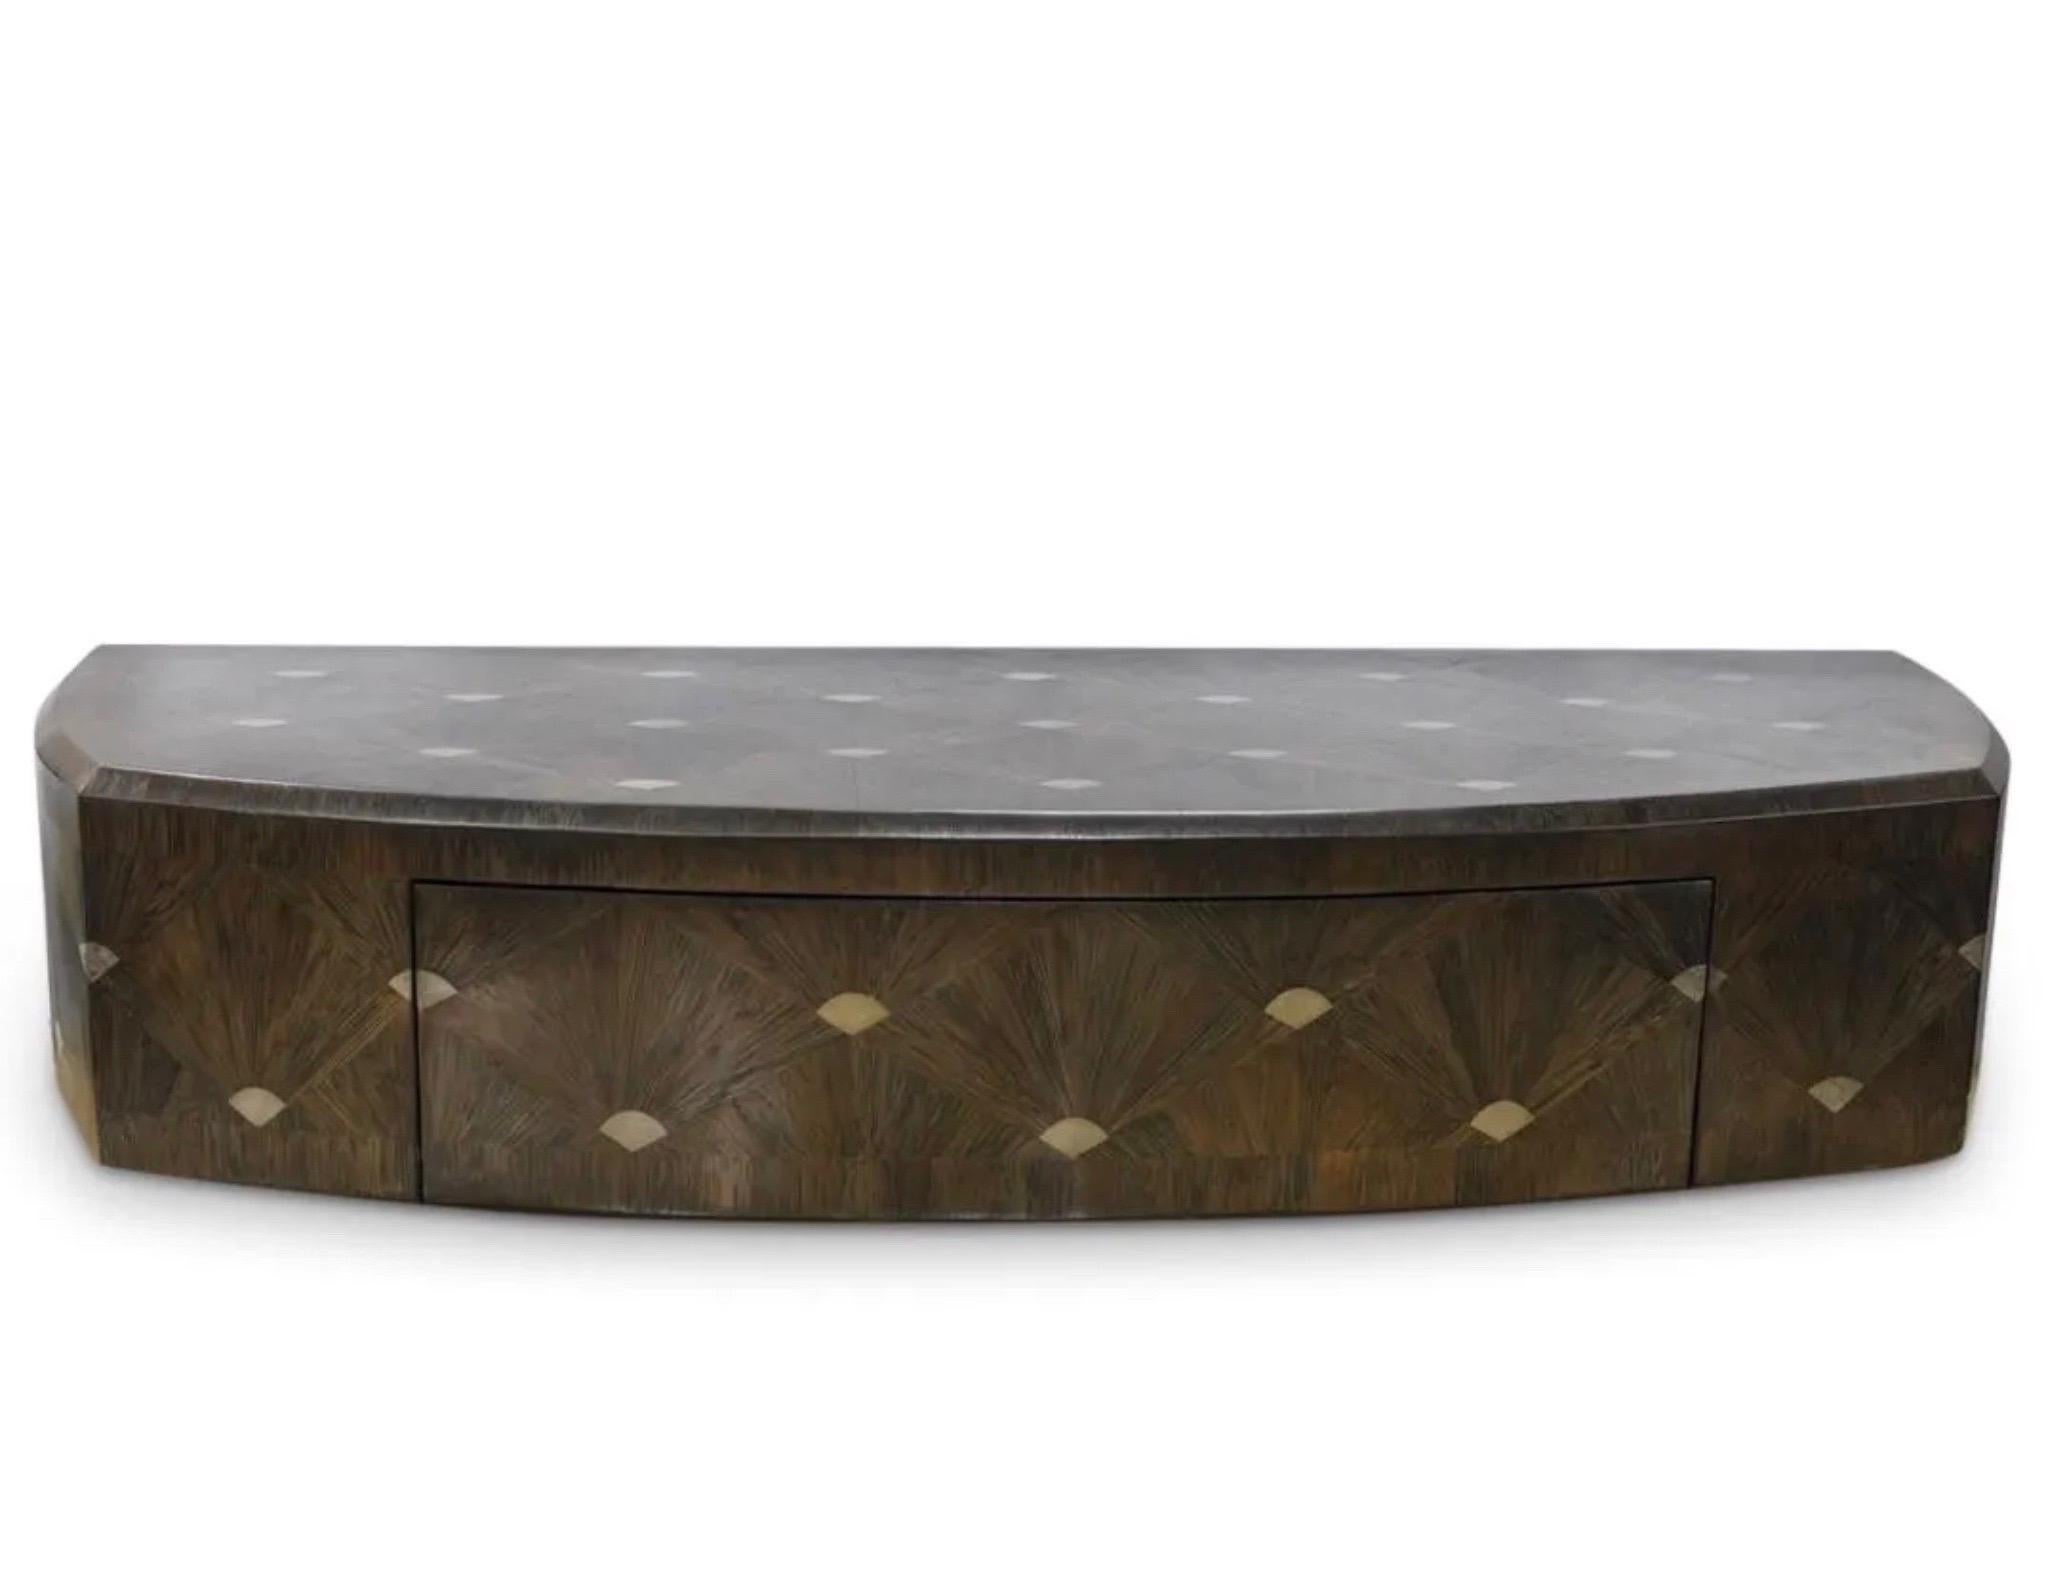 Ron Seff floating console with brown raffia wood marquetry and single drawer design.